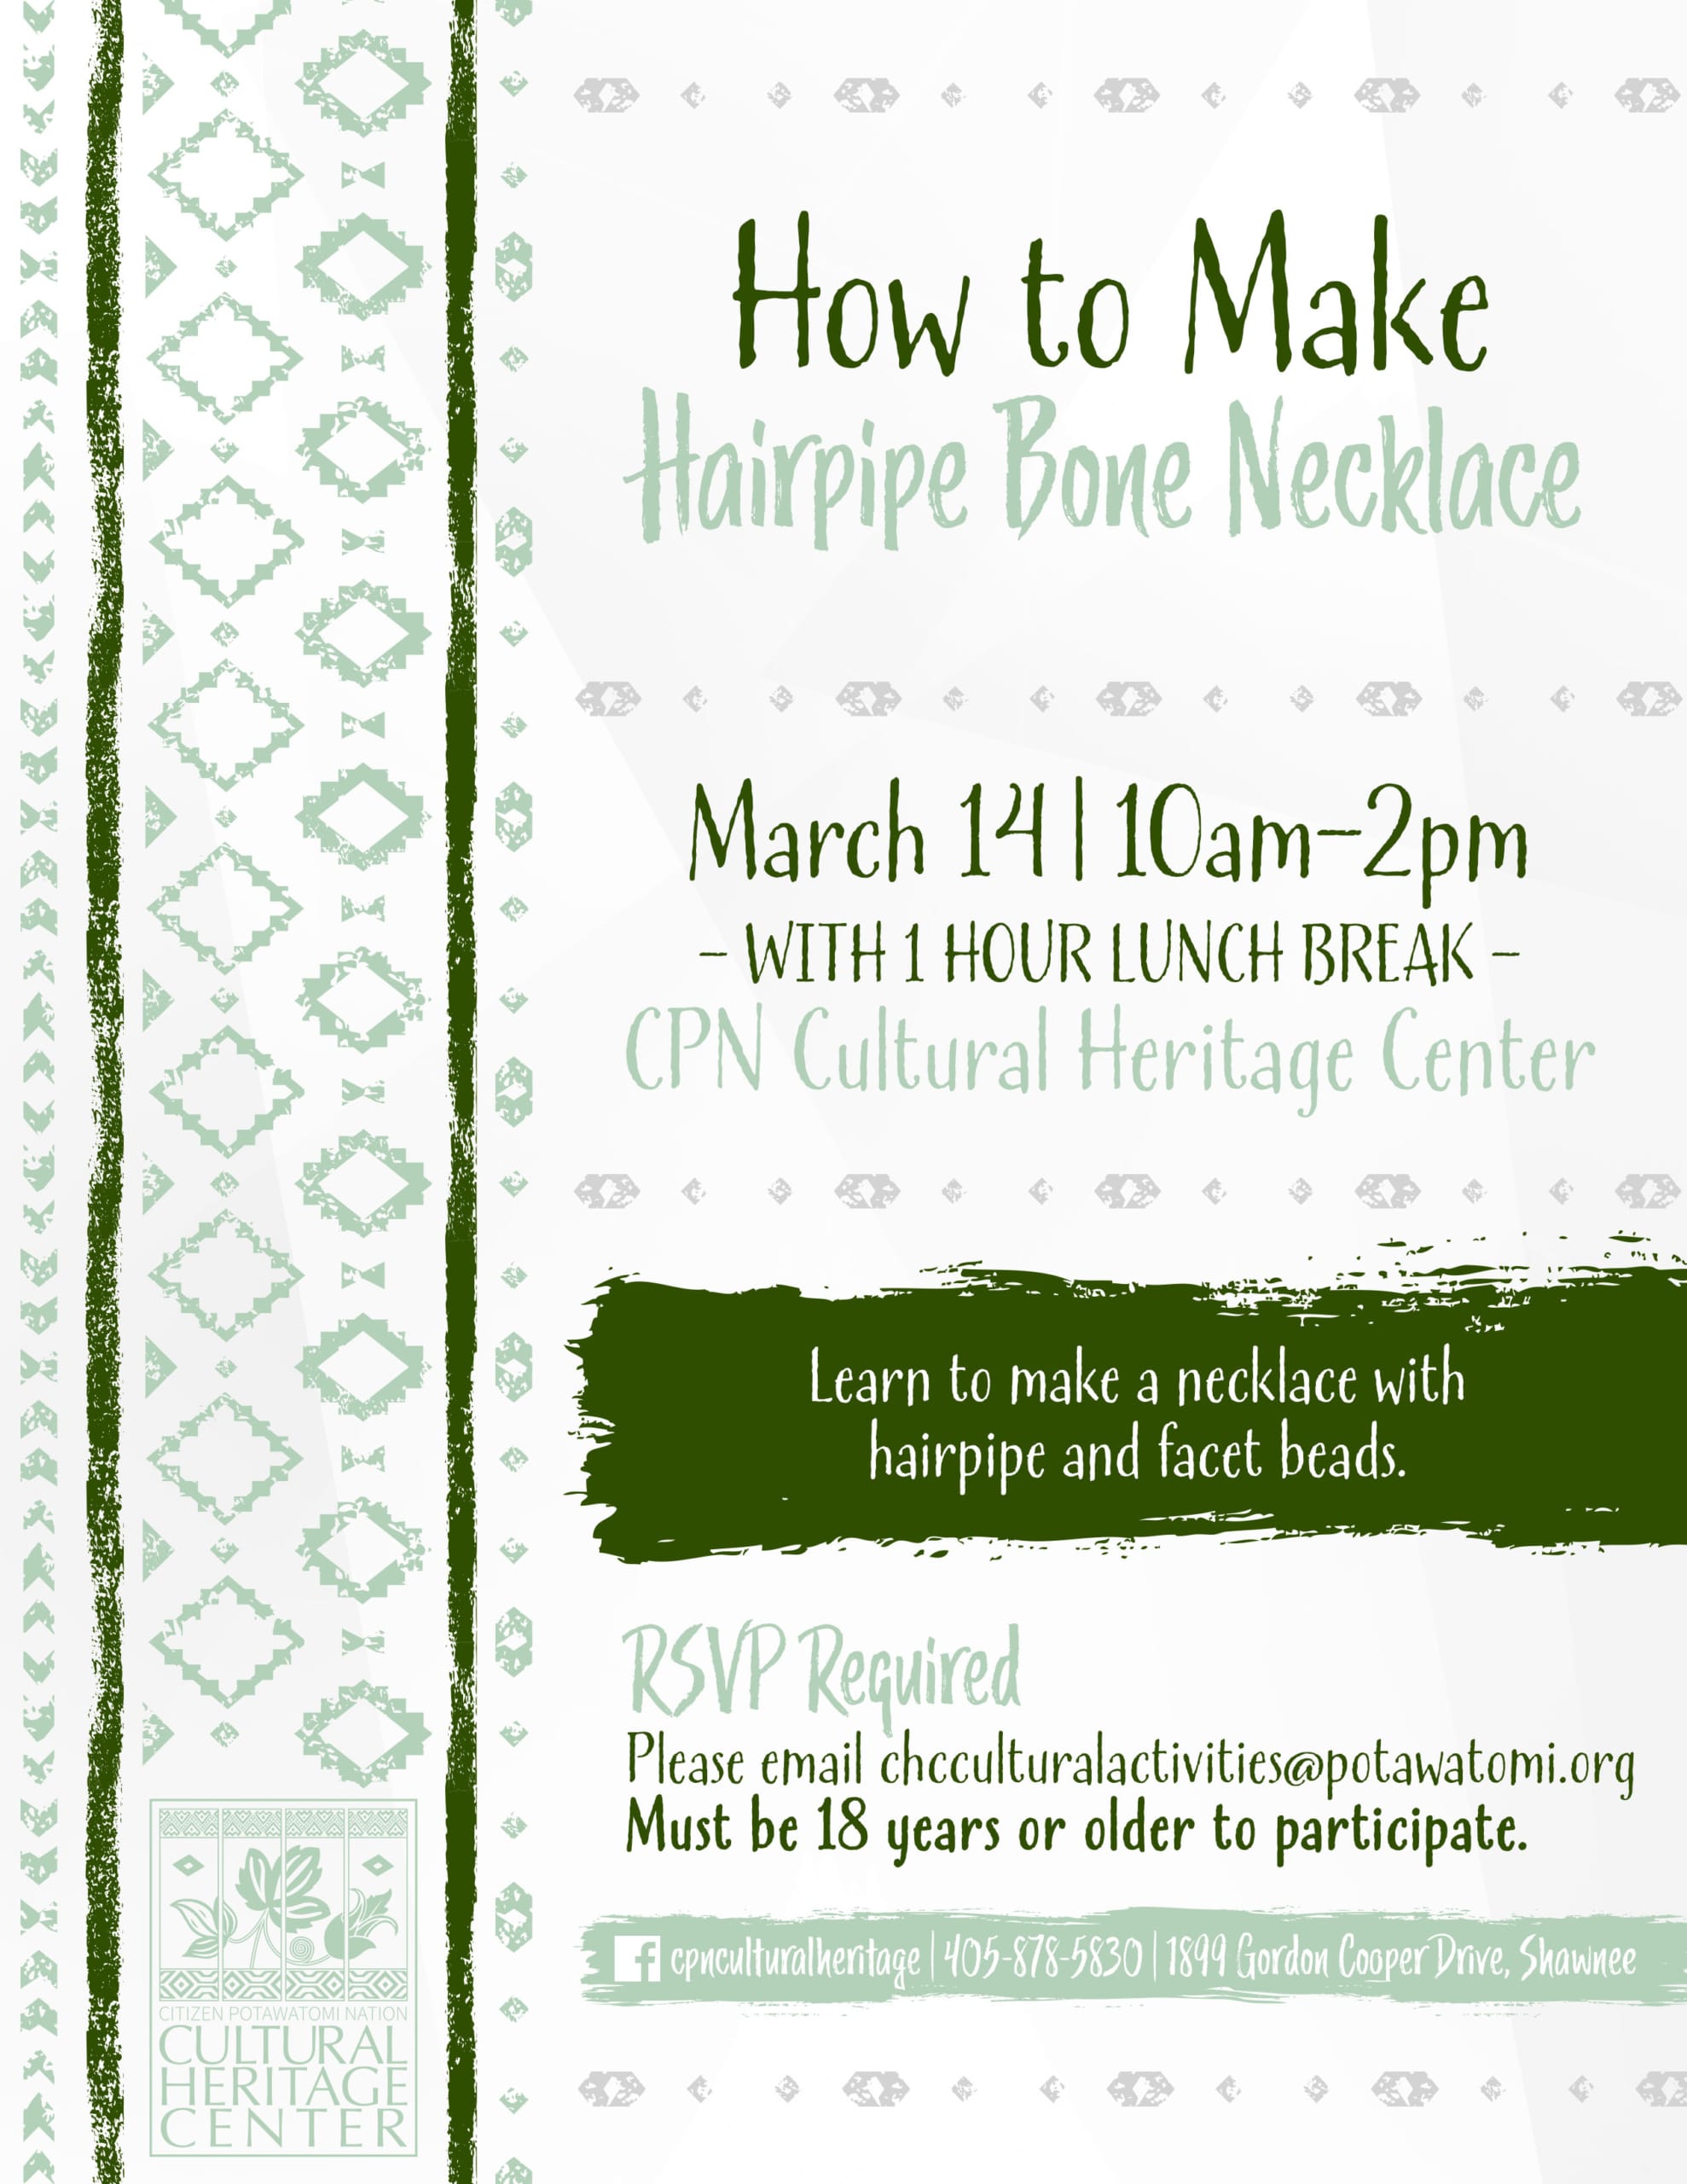 Green geometric designs frame information about the hairpipe bone necklace at the CHC March 14, 2023.